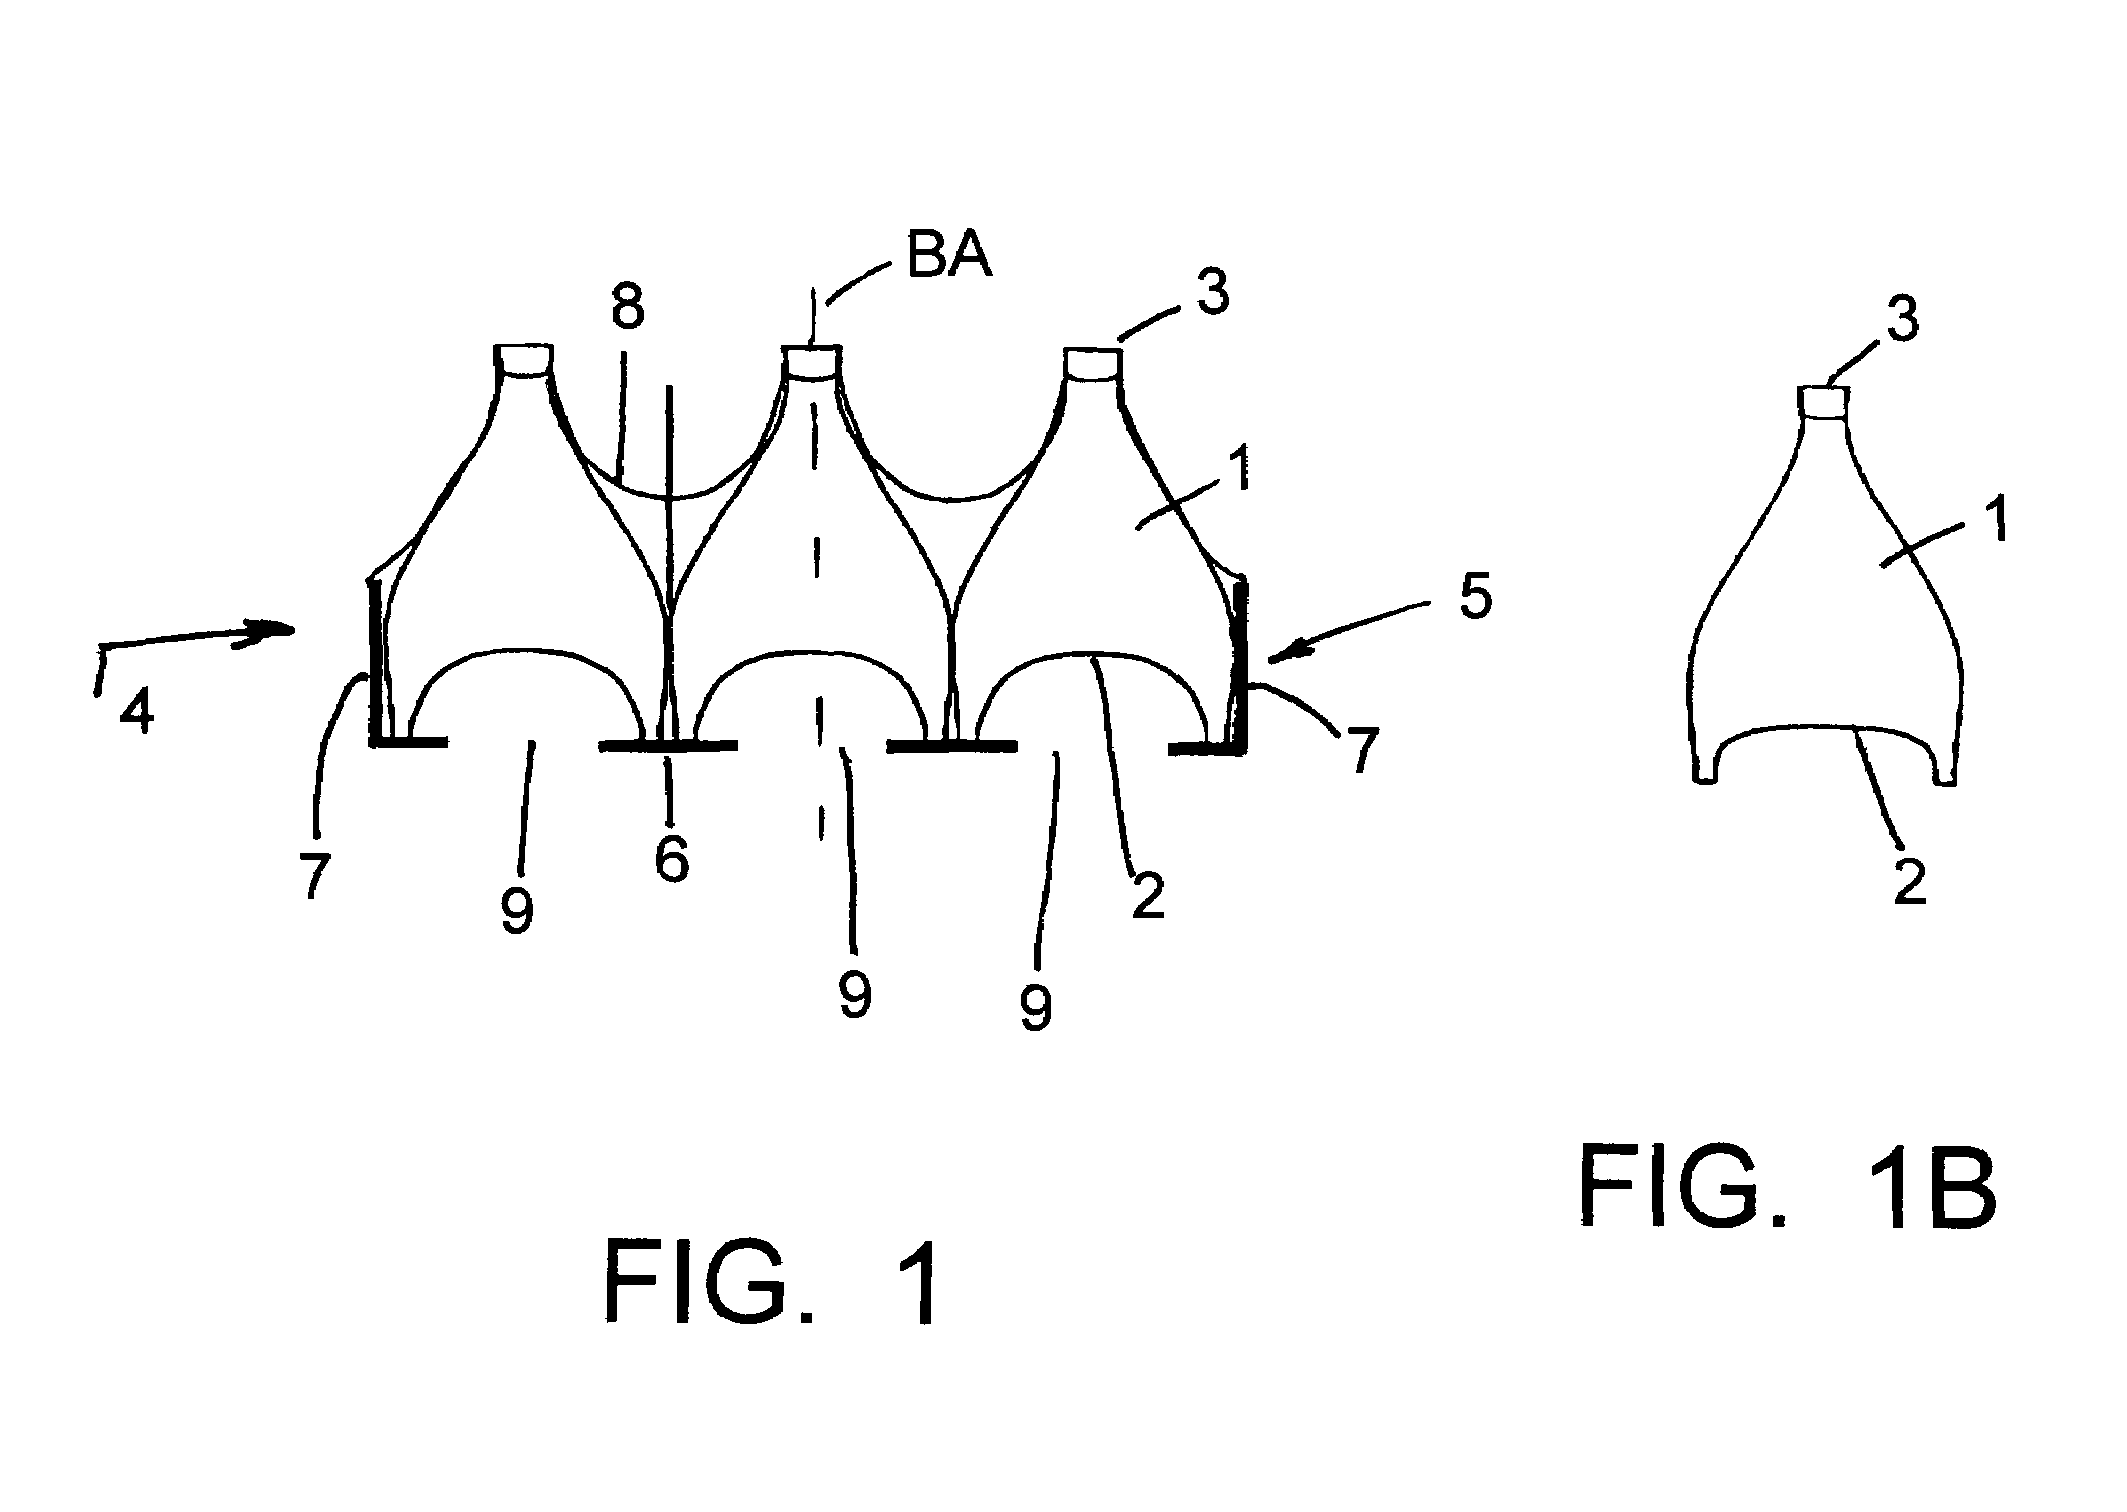 Method of manufacturing and stacking packaging units with increased stability